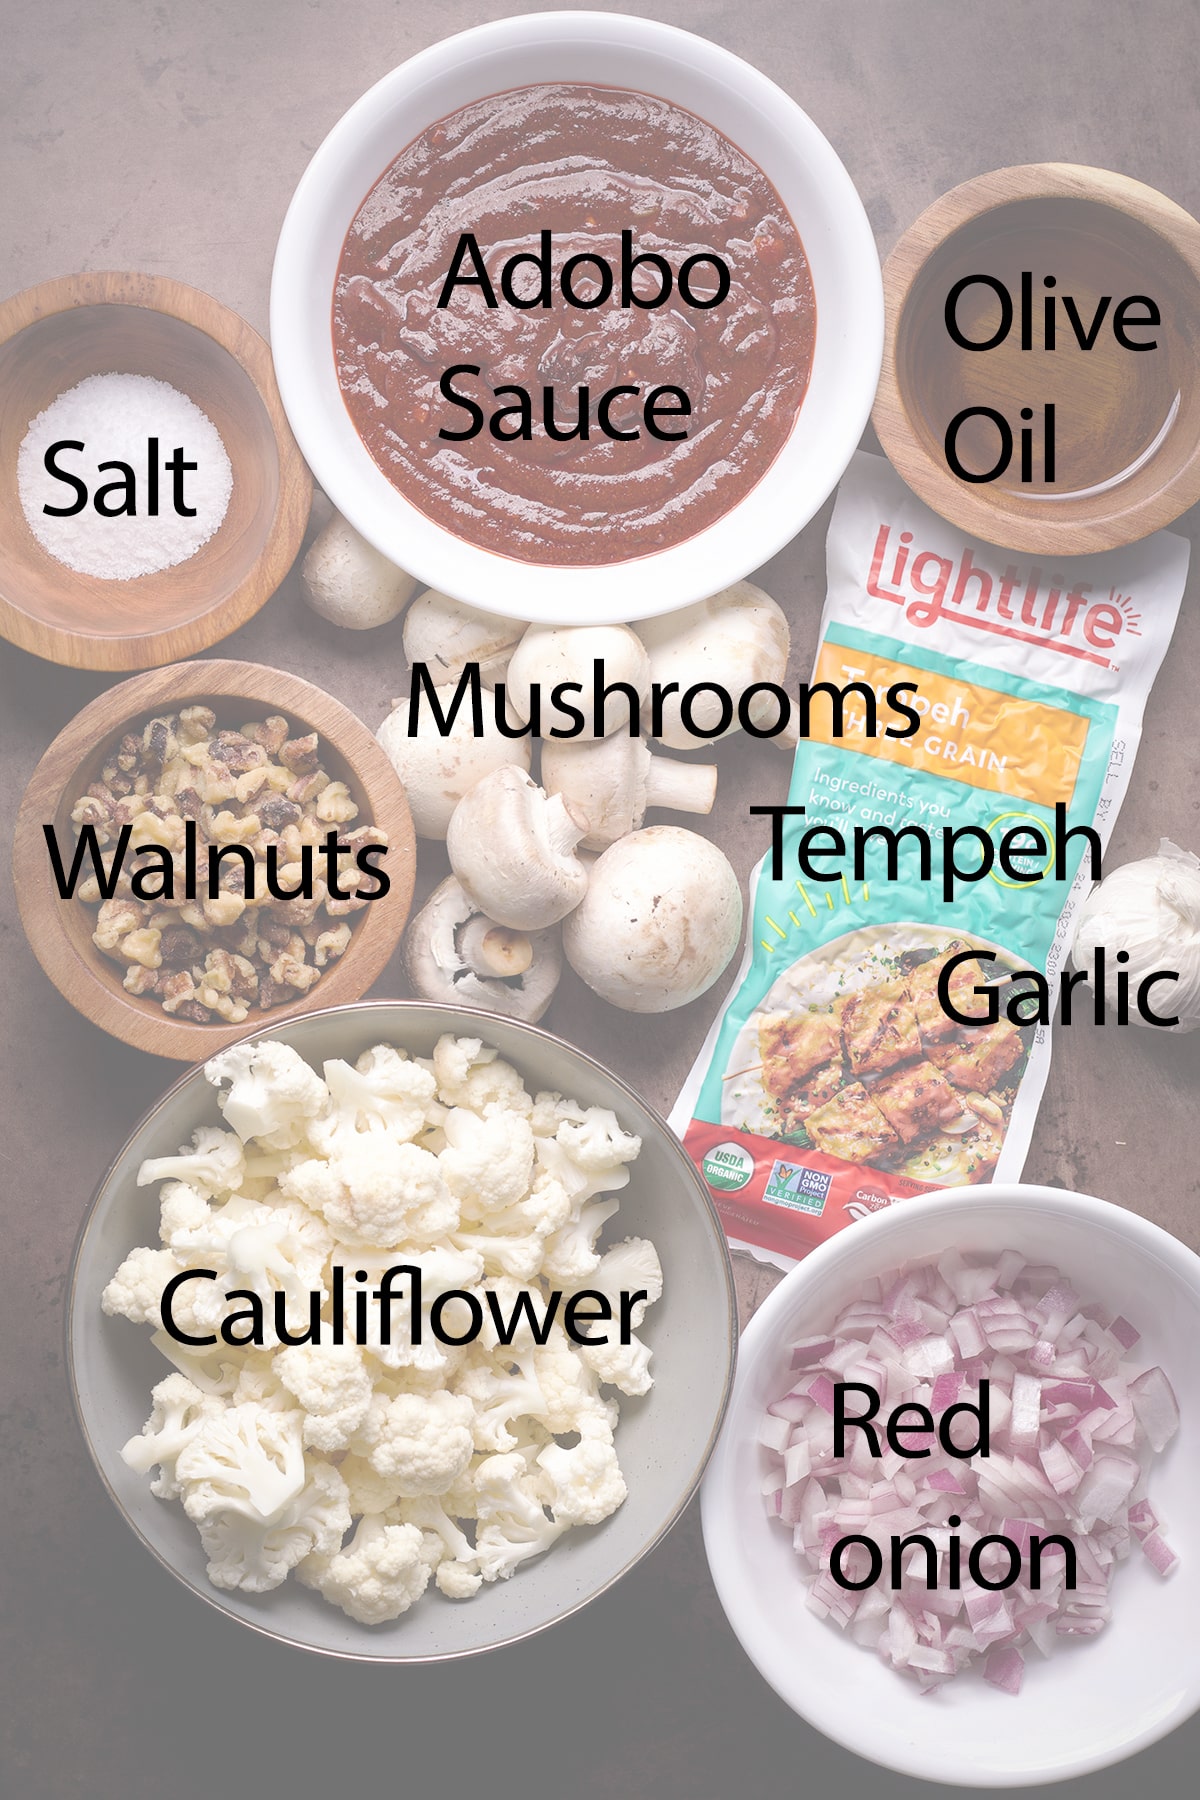 All the ingredients needed to make vegan taco meat.